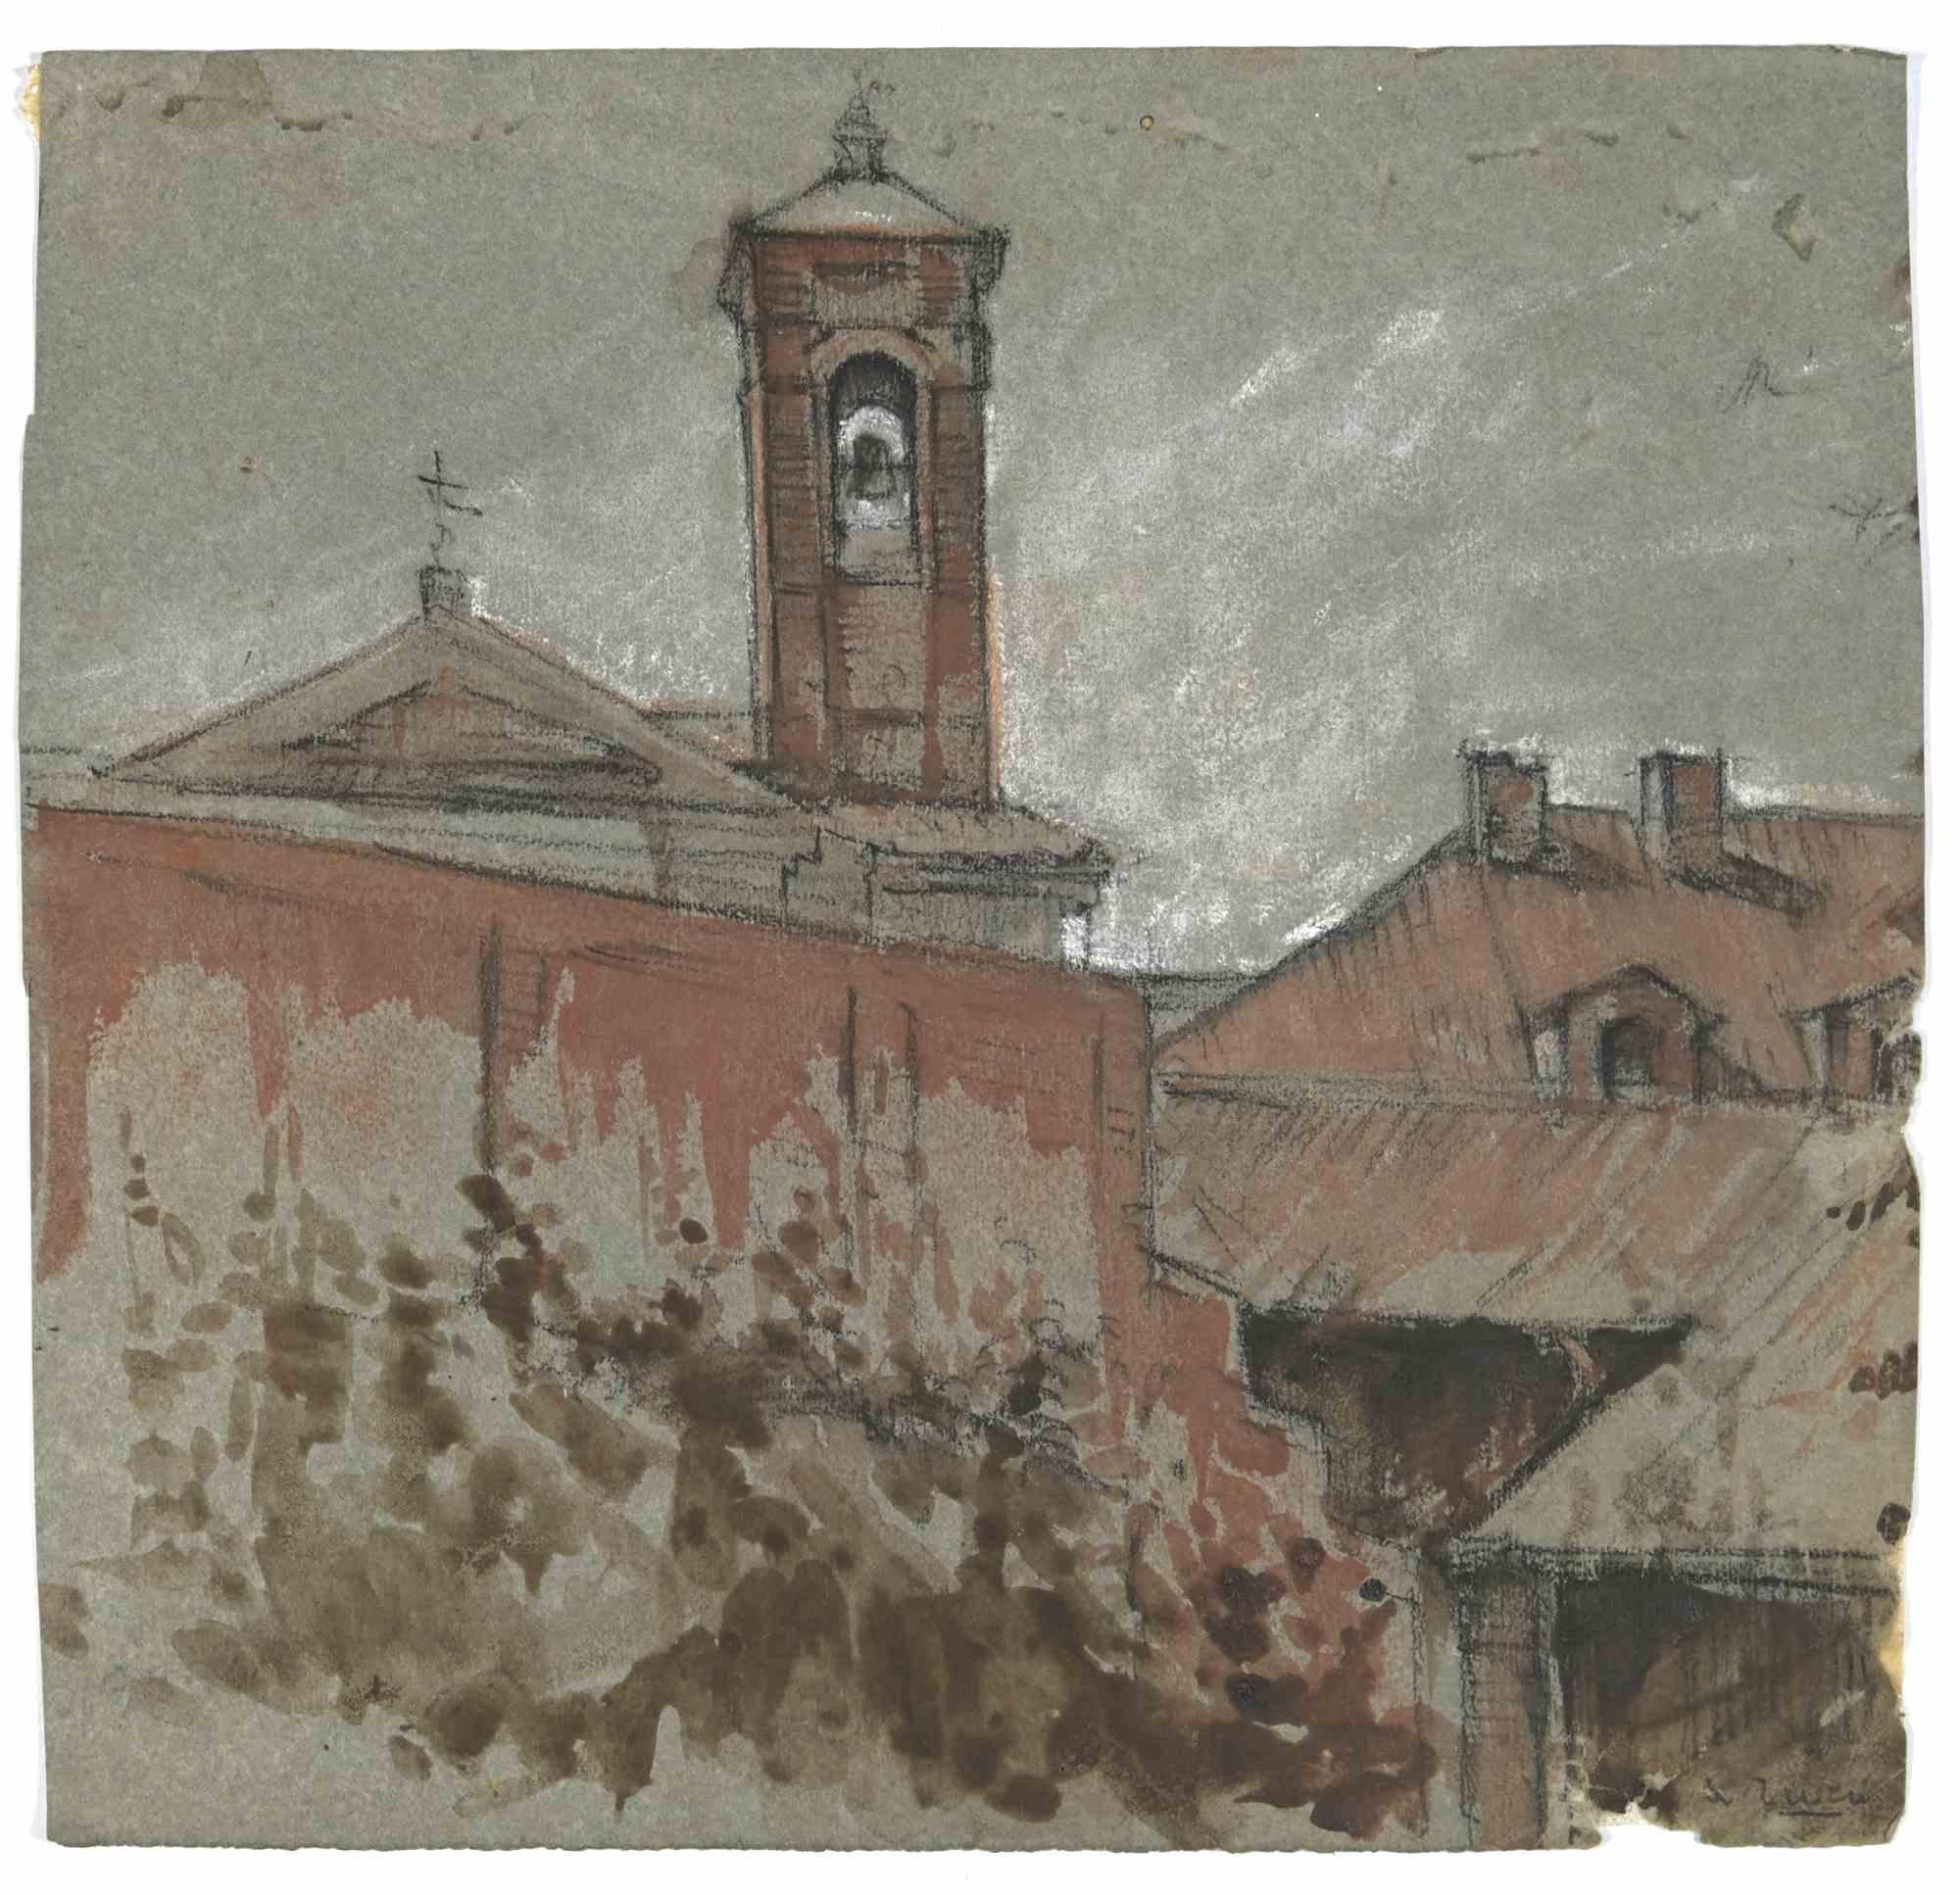 Church Bell is a drawing realized by Alberto Ziveri in the 1930s.

Watercolor on paper.

Hand-signed.

In good conditions.